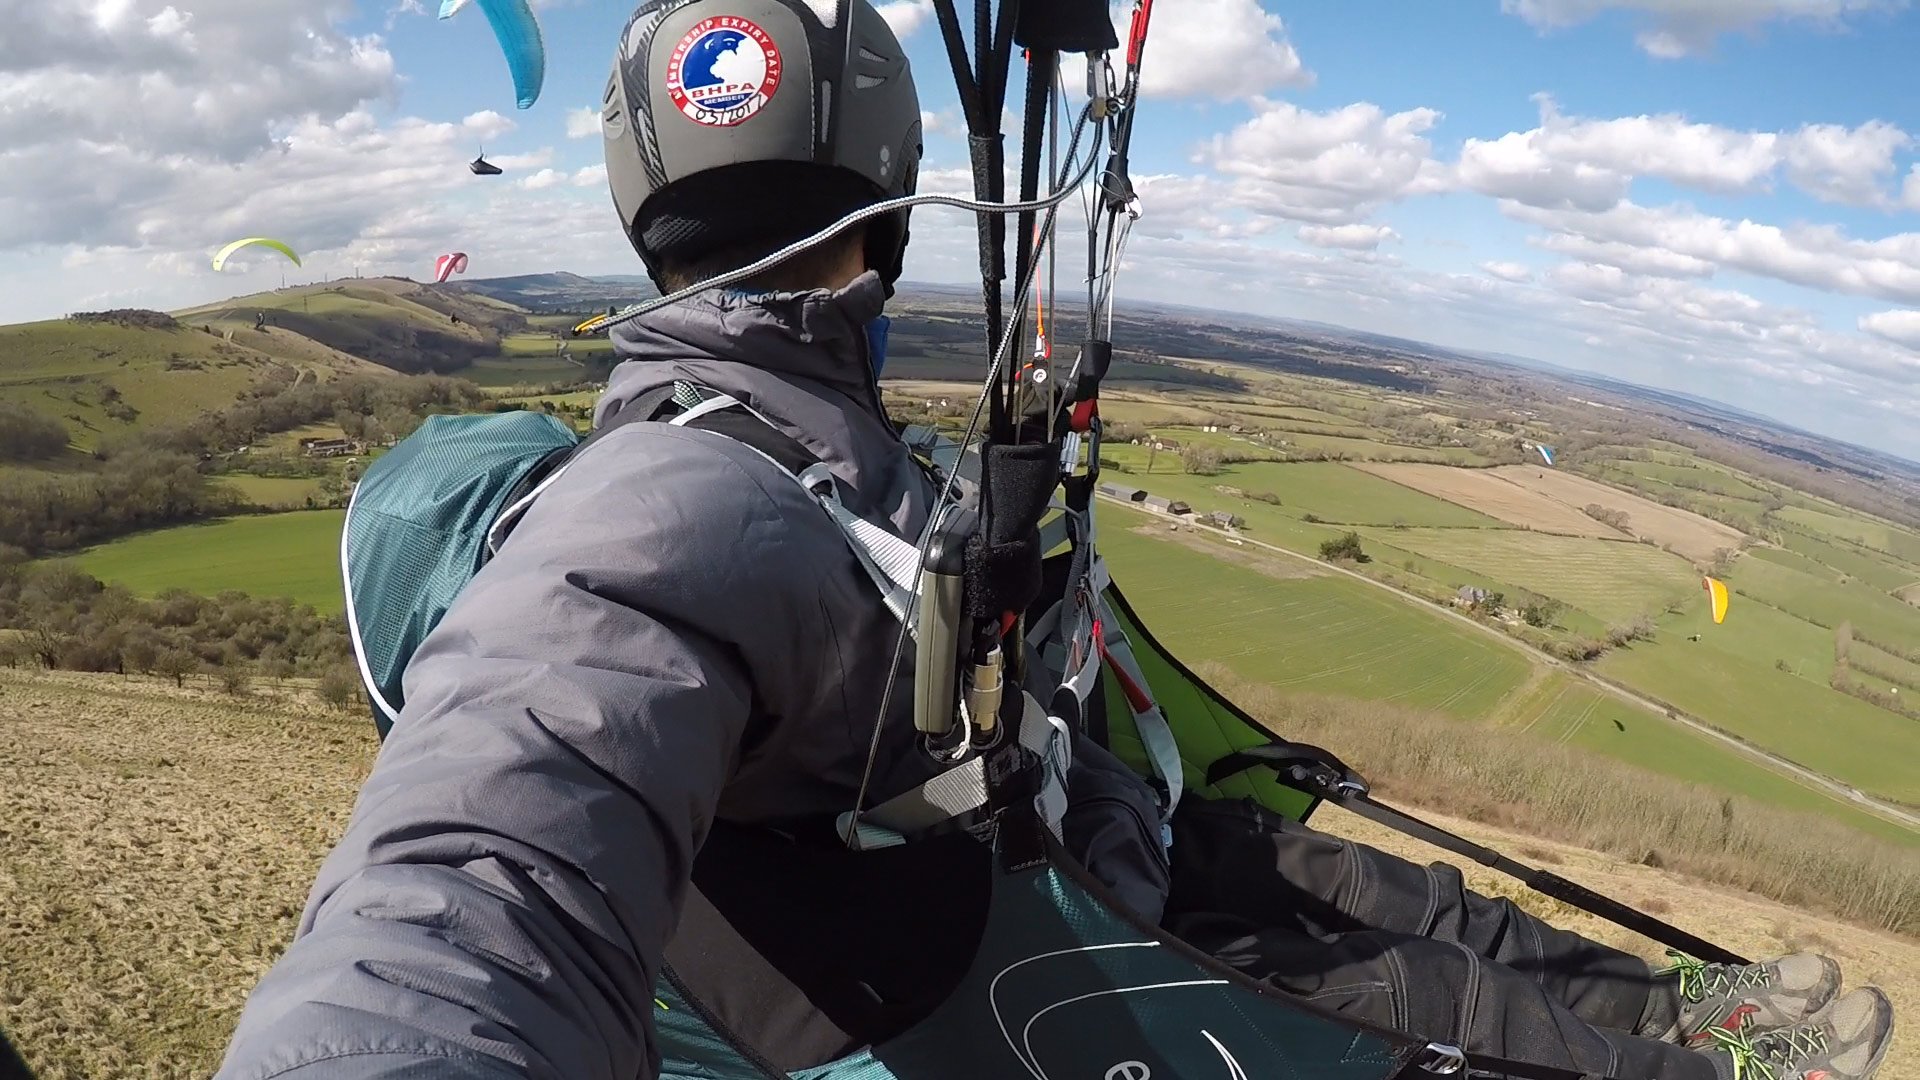 How to fly in paragliding traffic: look first